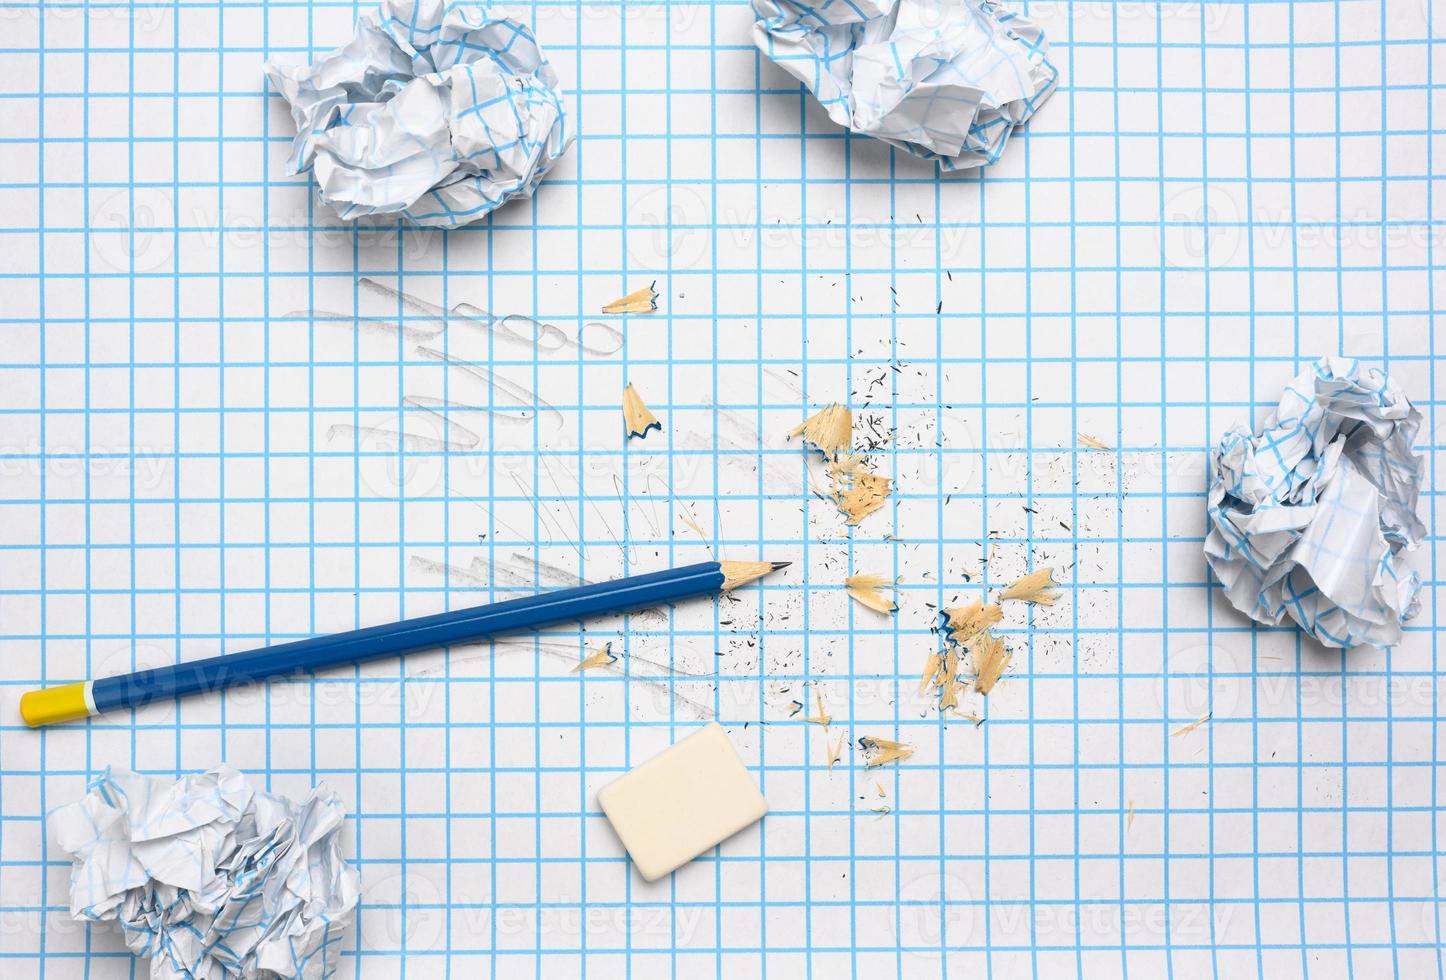 crumpled paper balls and a sharpened wooden pencil with shavings on a checkered paper sheet photo